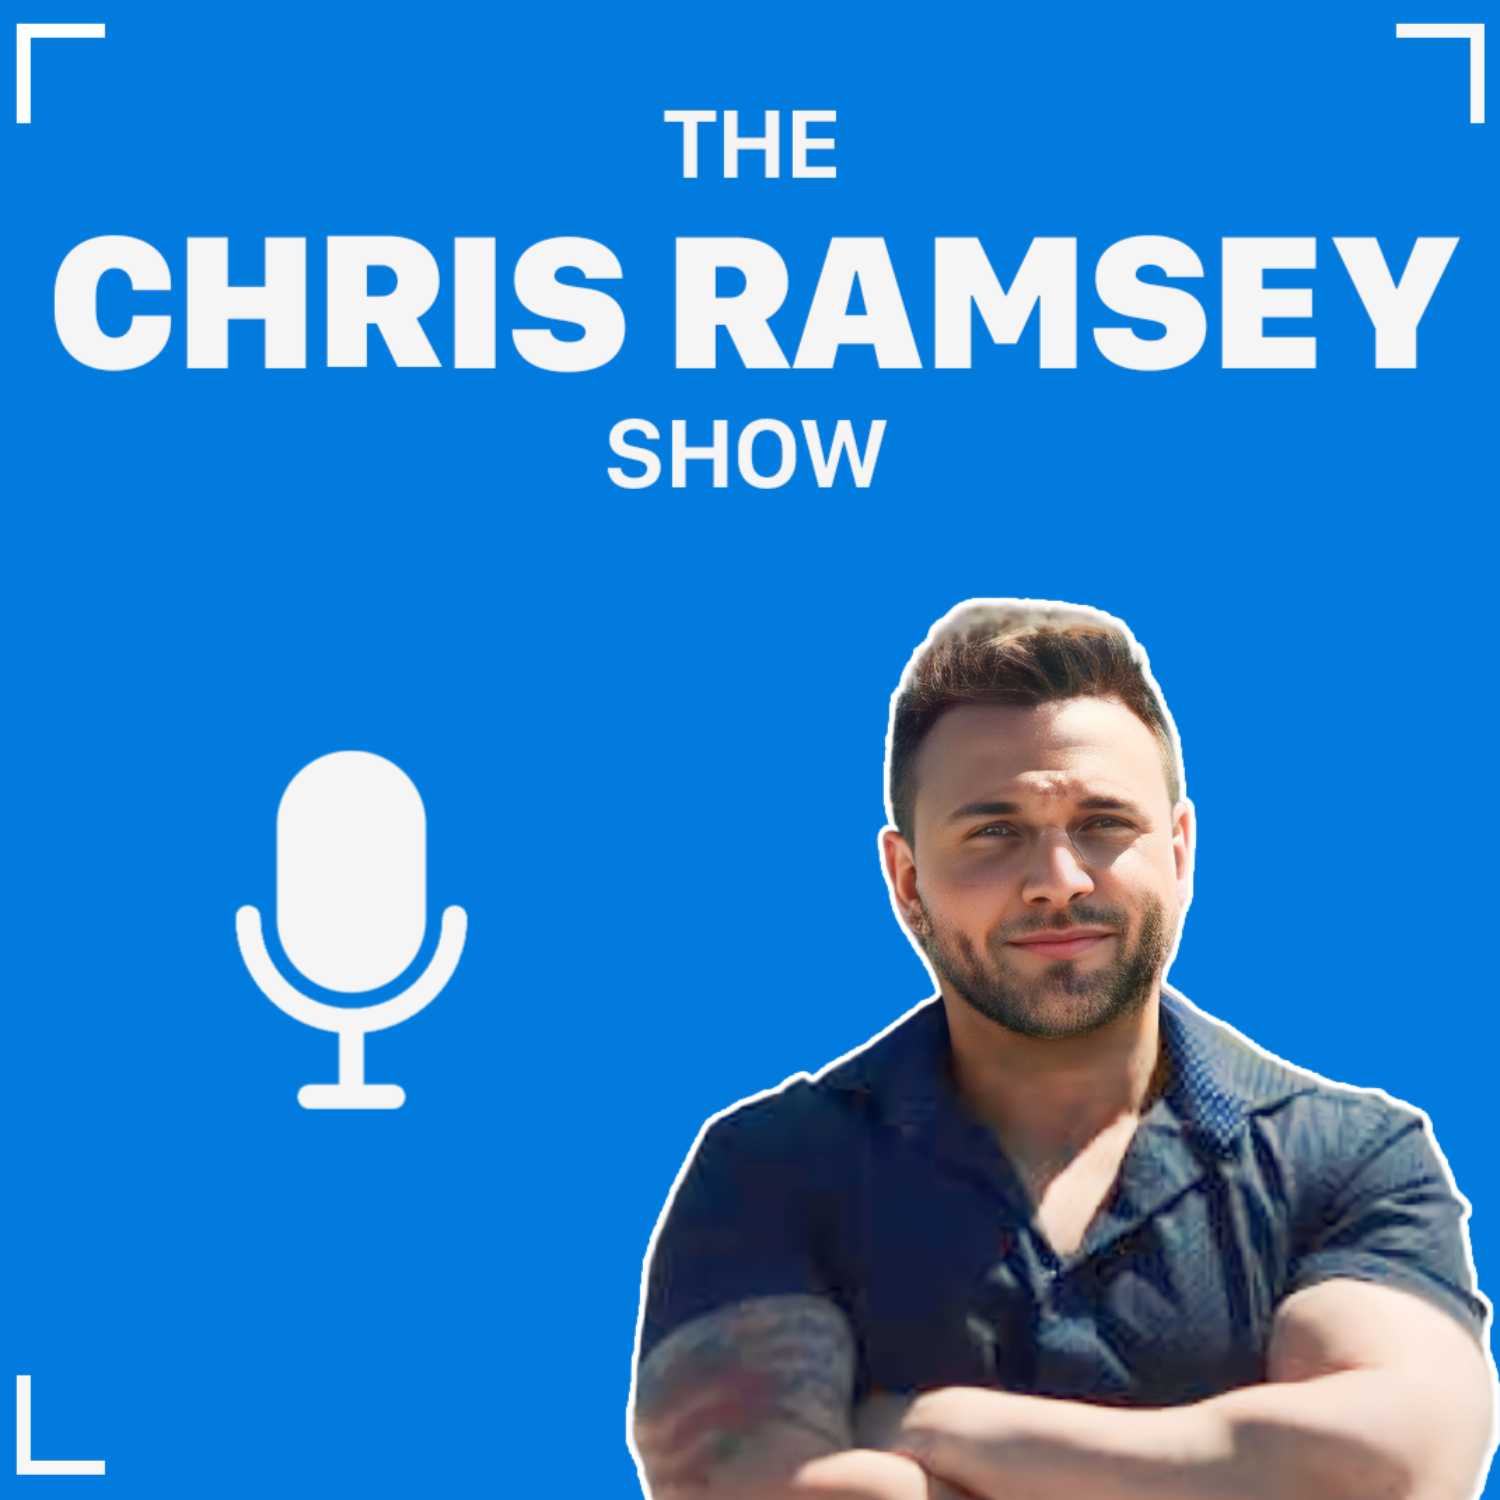 Feels like I'm stealing money (The Chris Ramsey Show, episode 4)